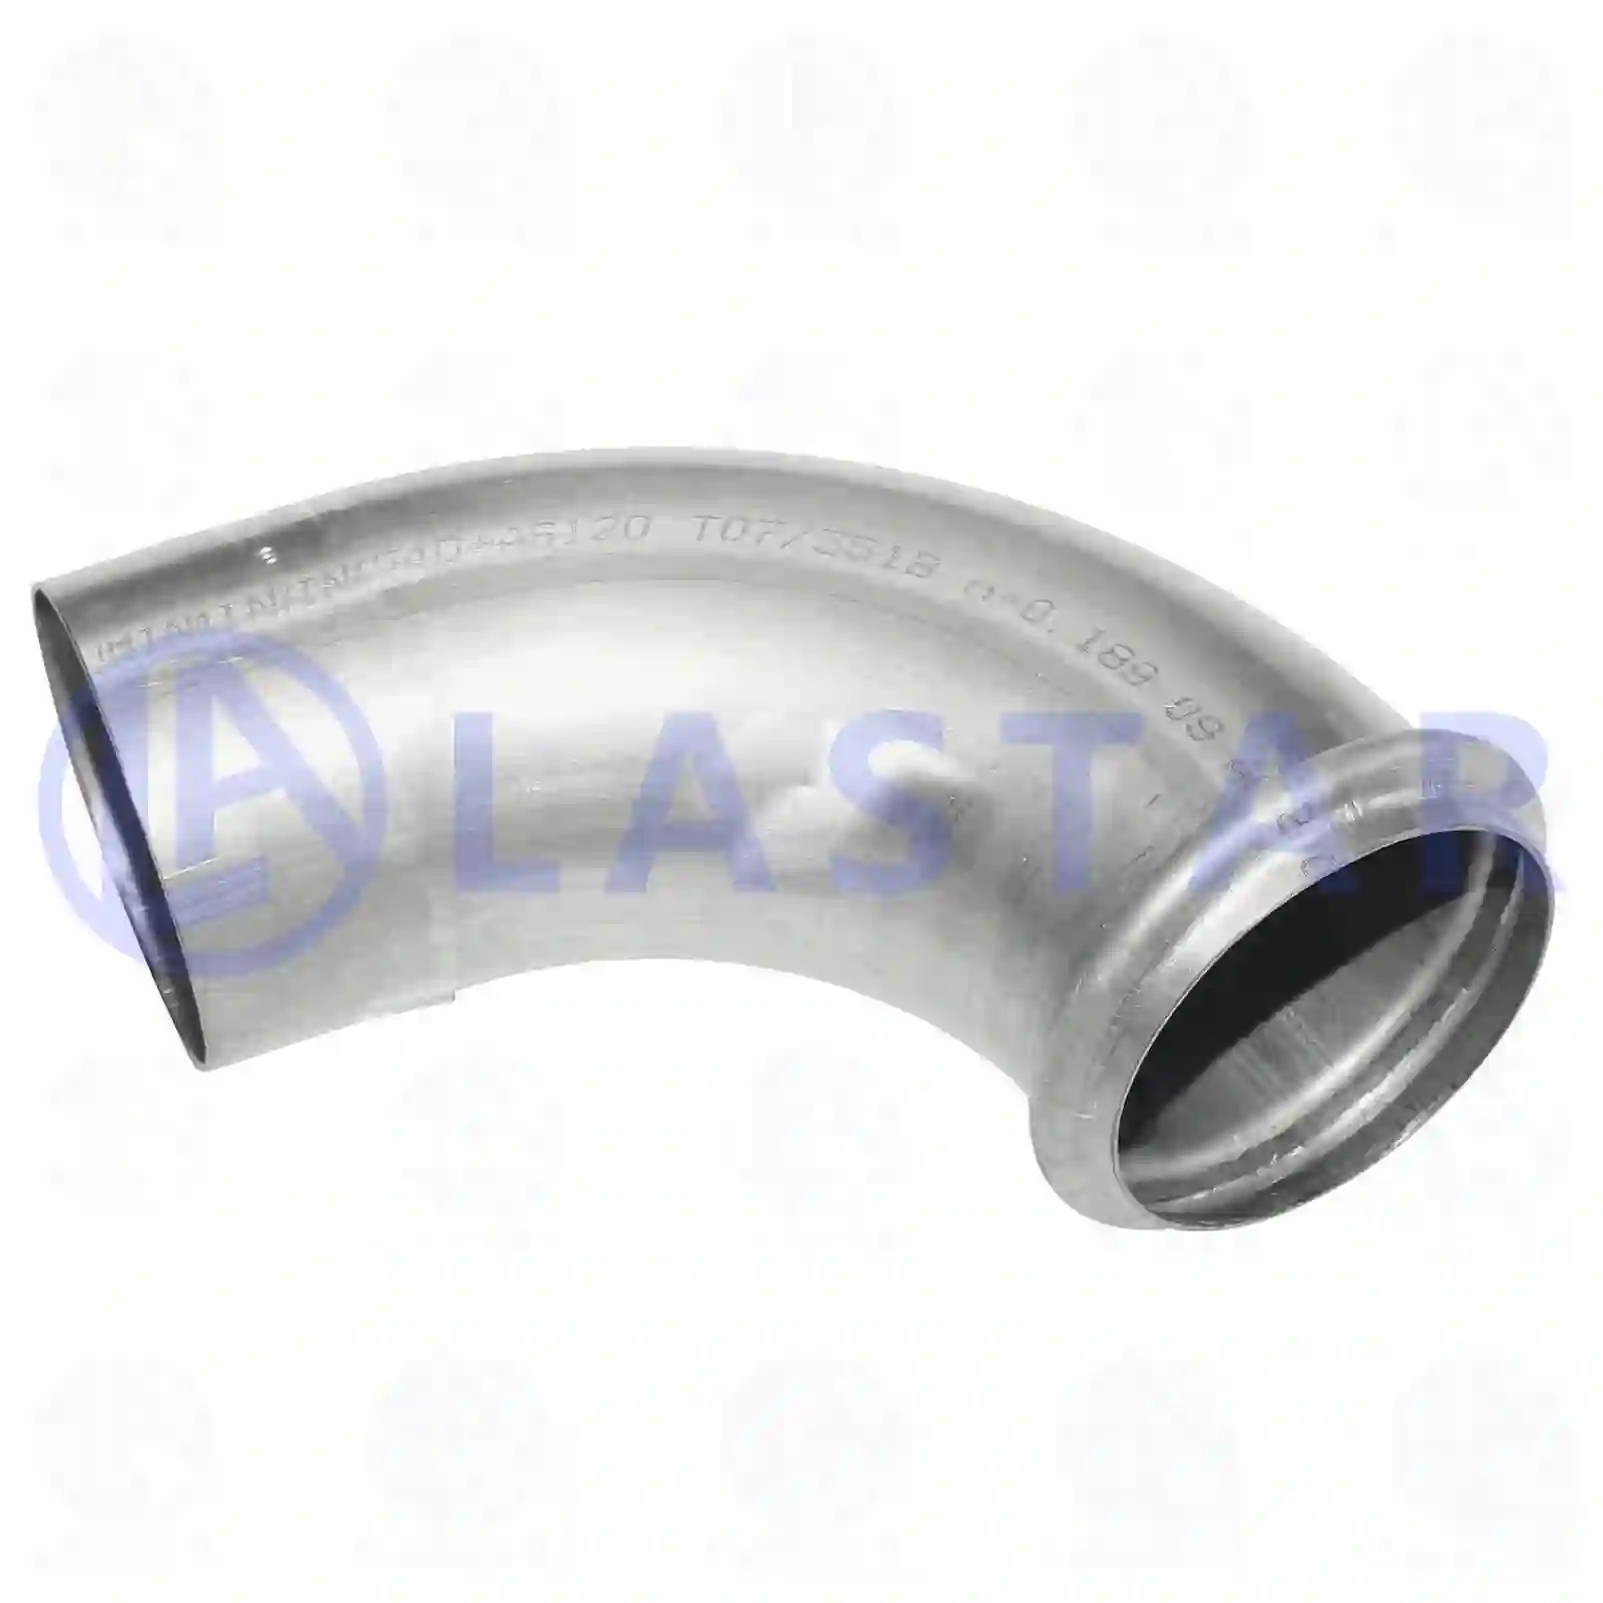 Exhaust pipe, 77706842, 1088969, 8157257 ||  77706842 Lastar Spare Part | Truck Spare Parts, Auotomotive Spare Parts Exhaust pipe, 77706842, 1088969, 8157257 ||  77706842 Lastar Spare Part | Truck Spare Parts, Auotomotive Spare Parts